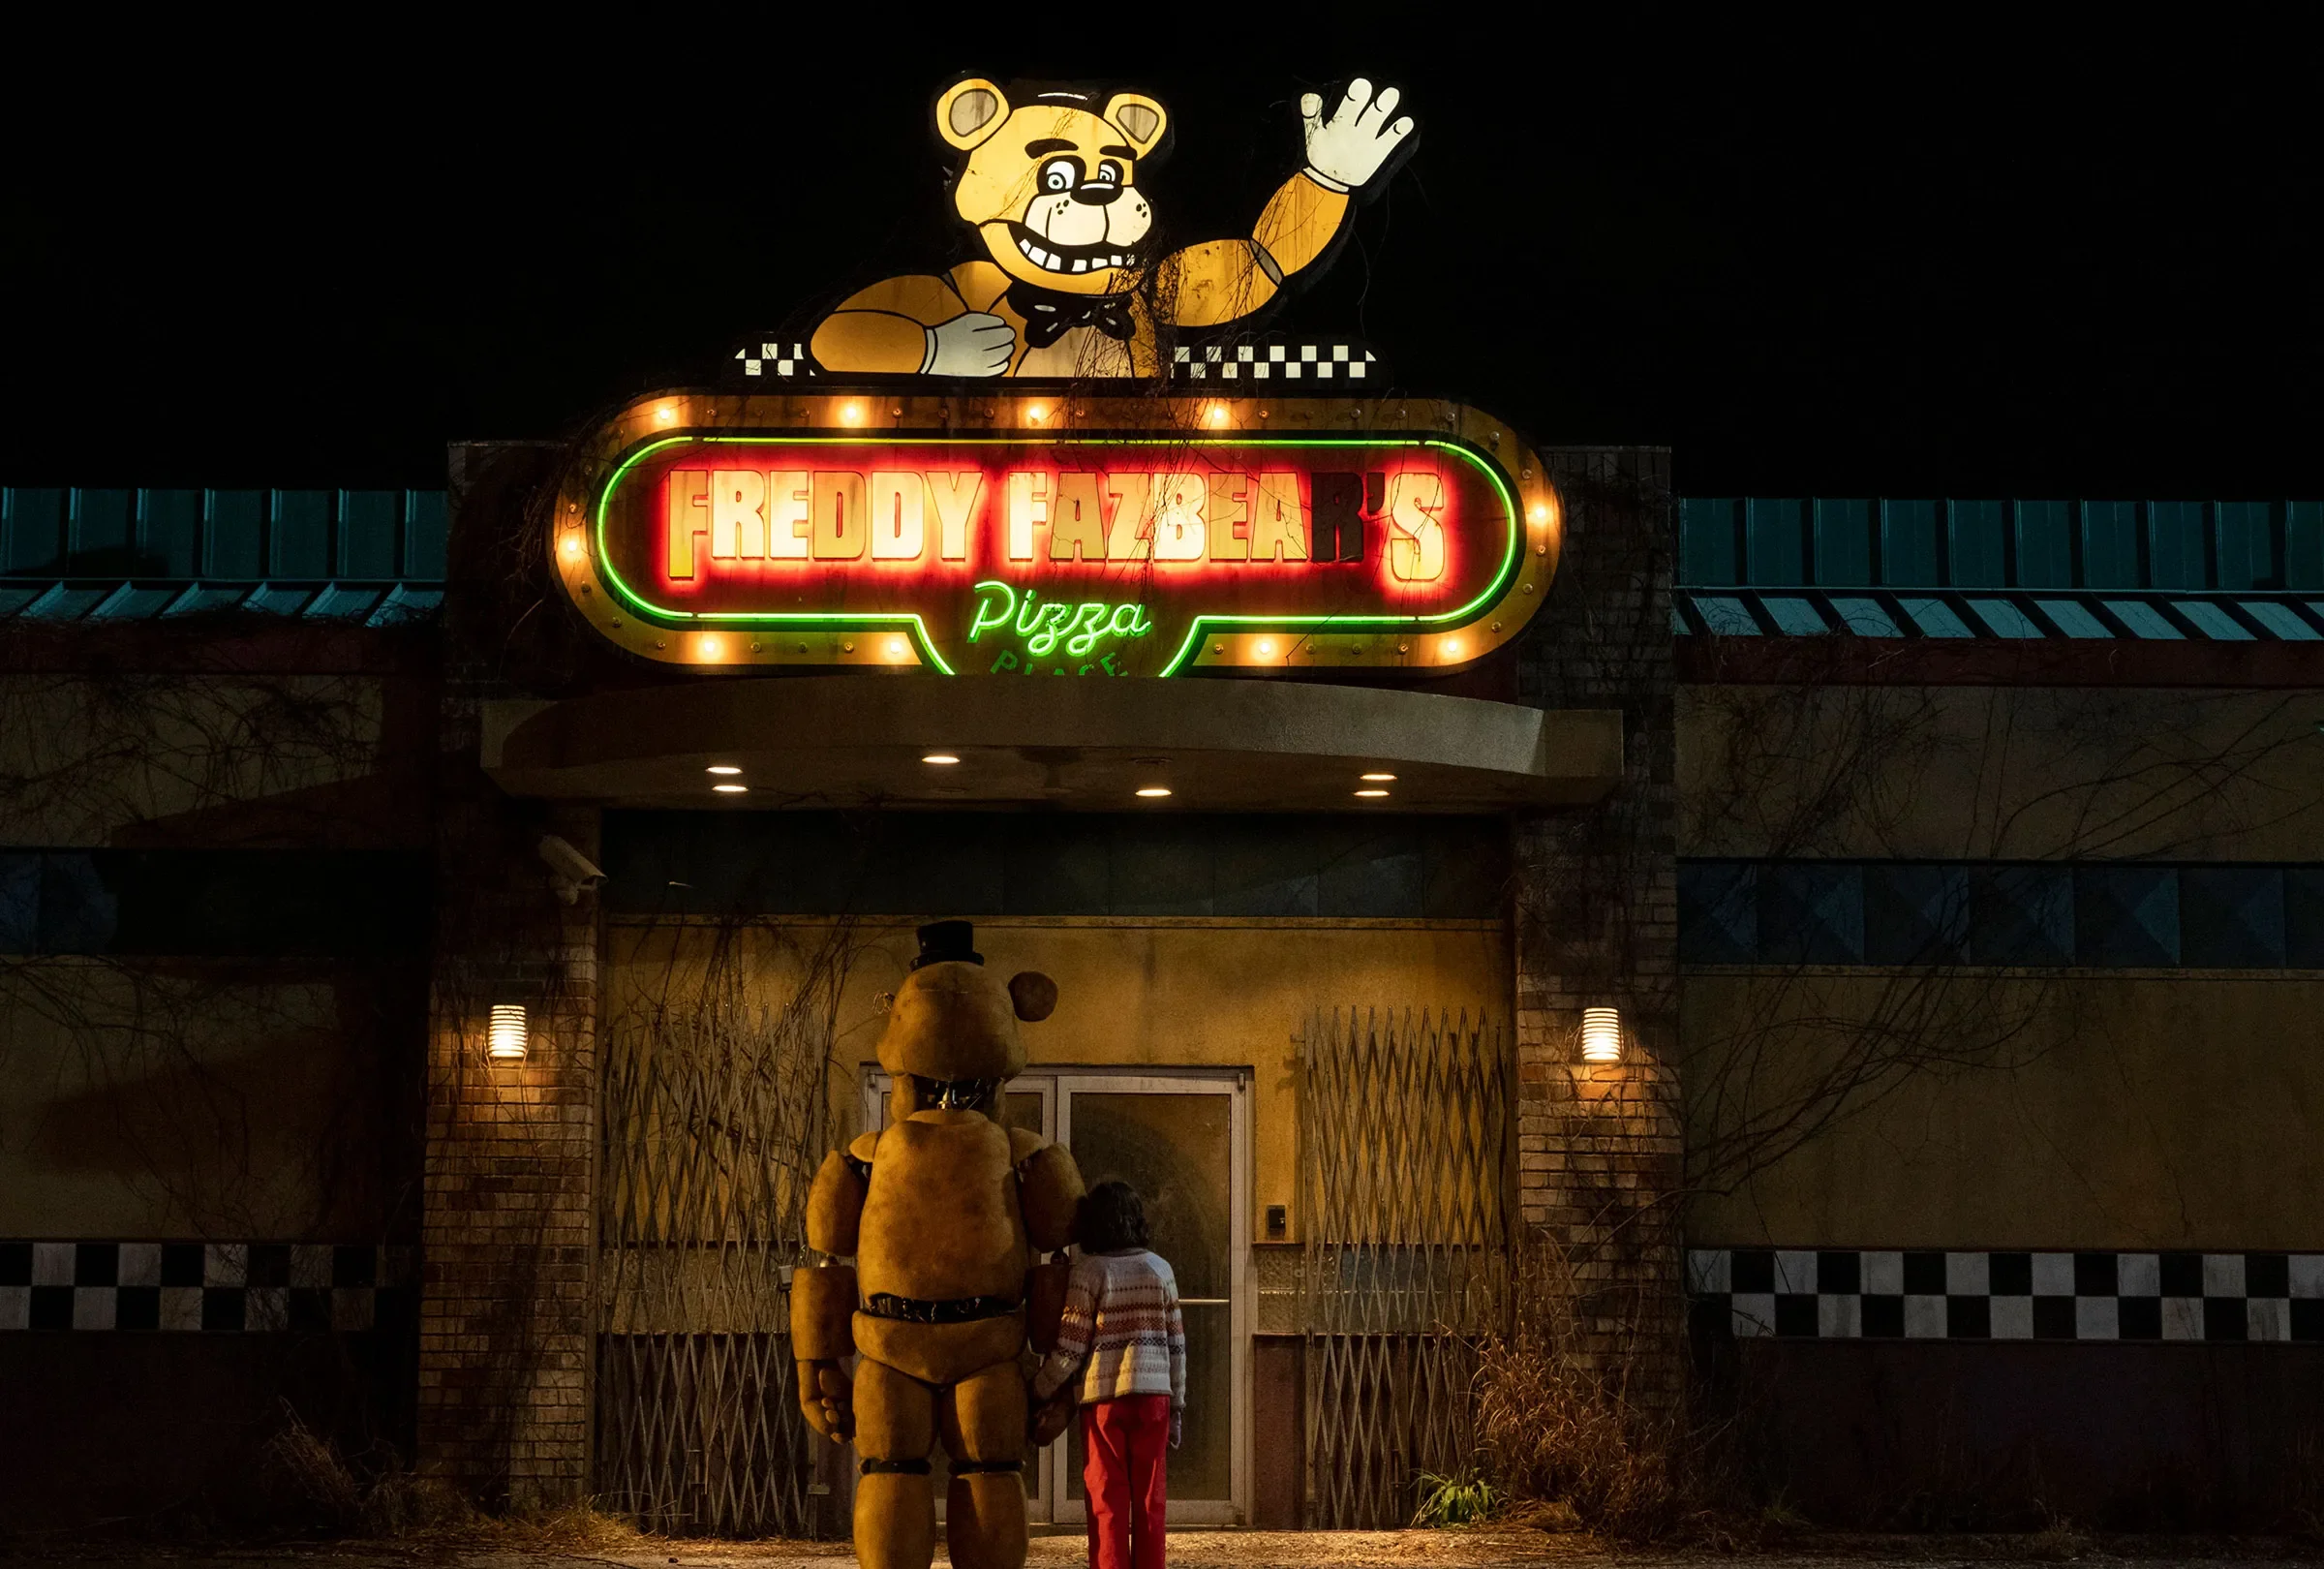 A sequel to the film adaptation of Five Nights at Freddy's has been announced